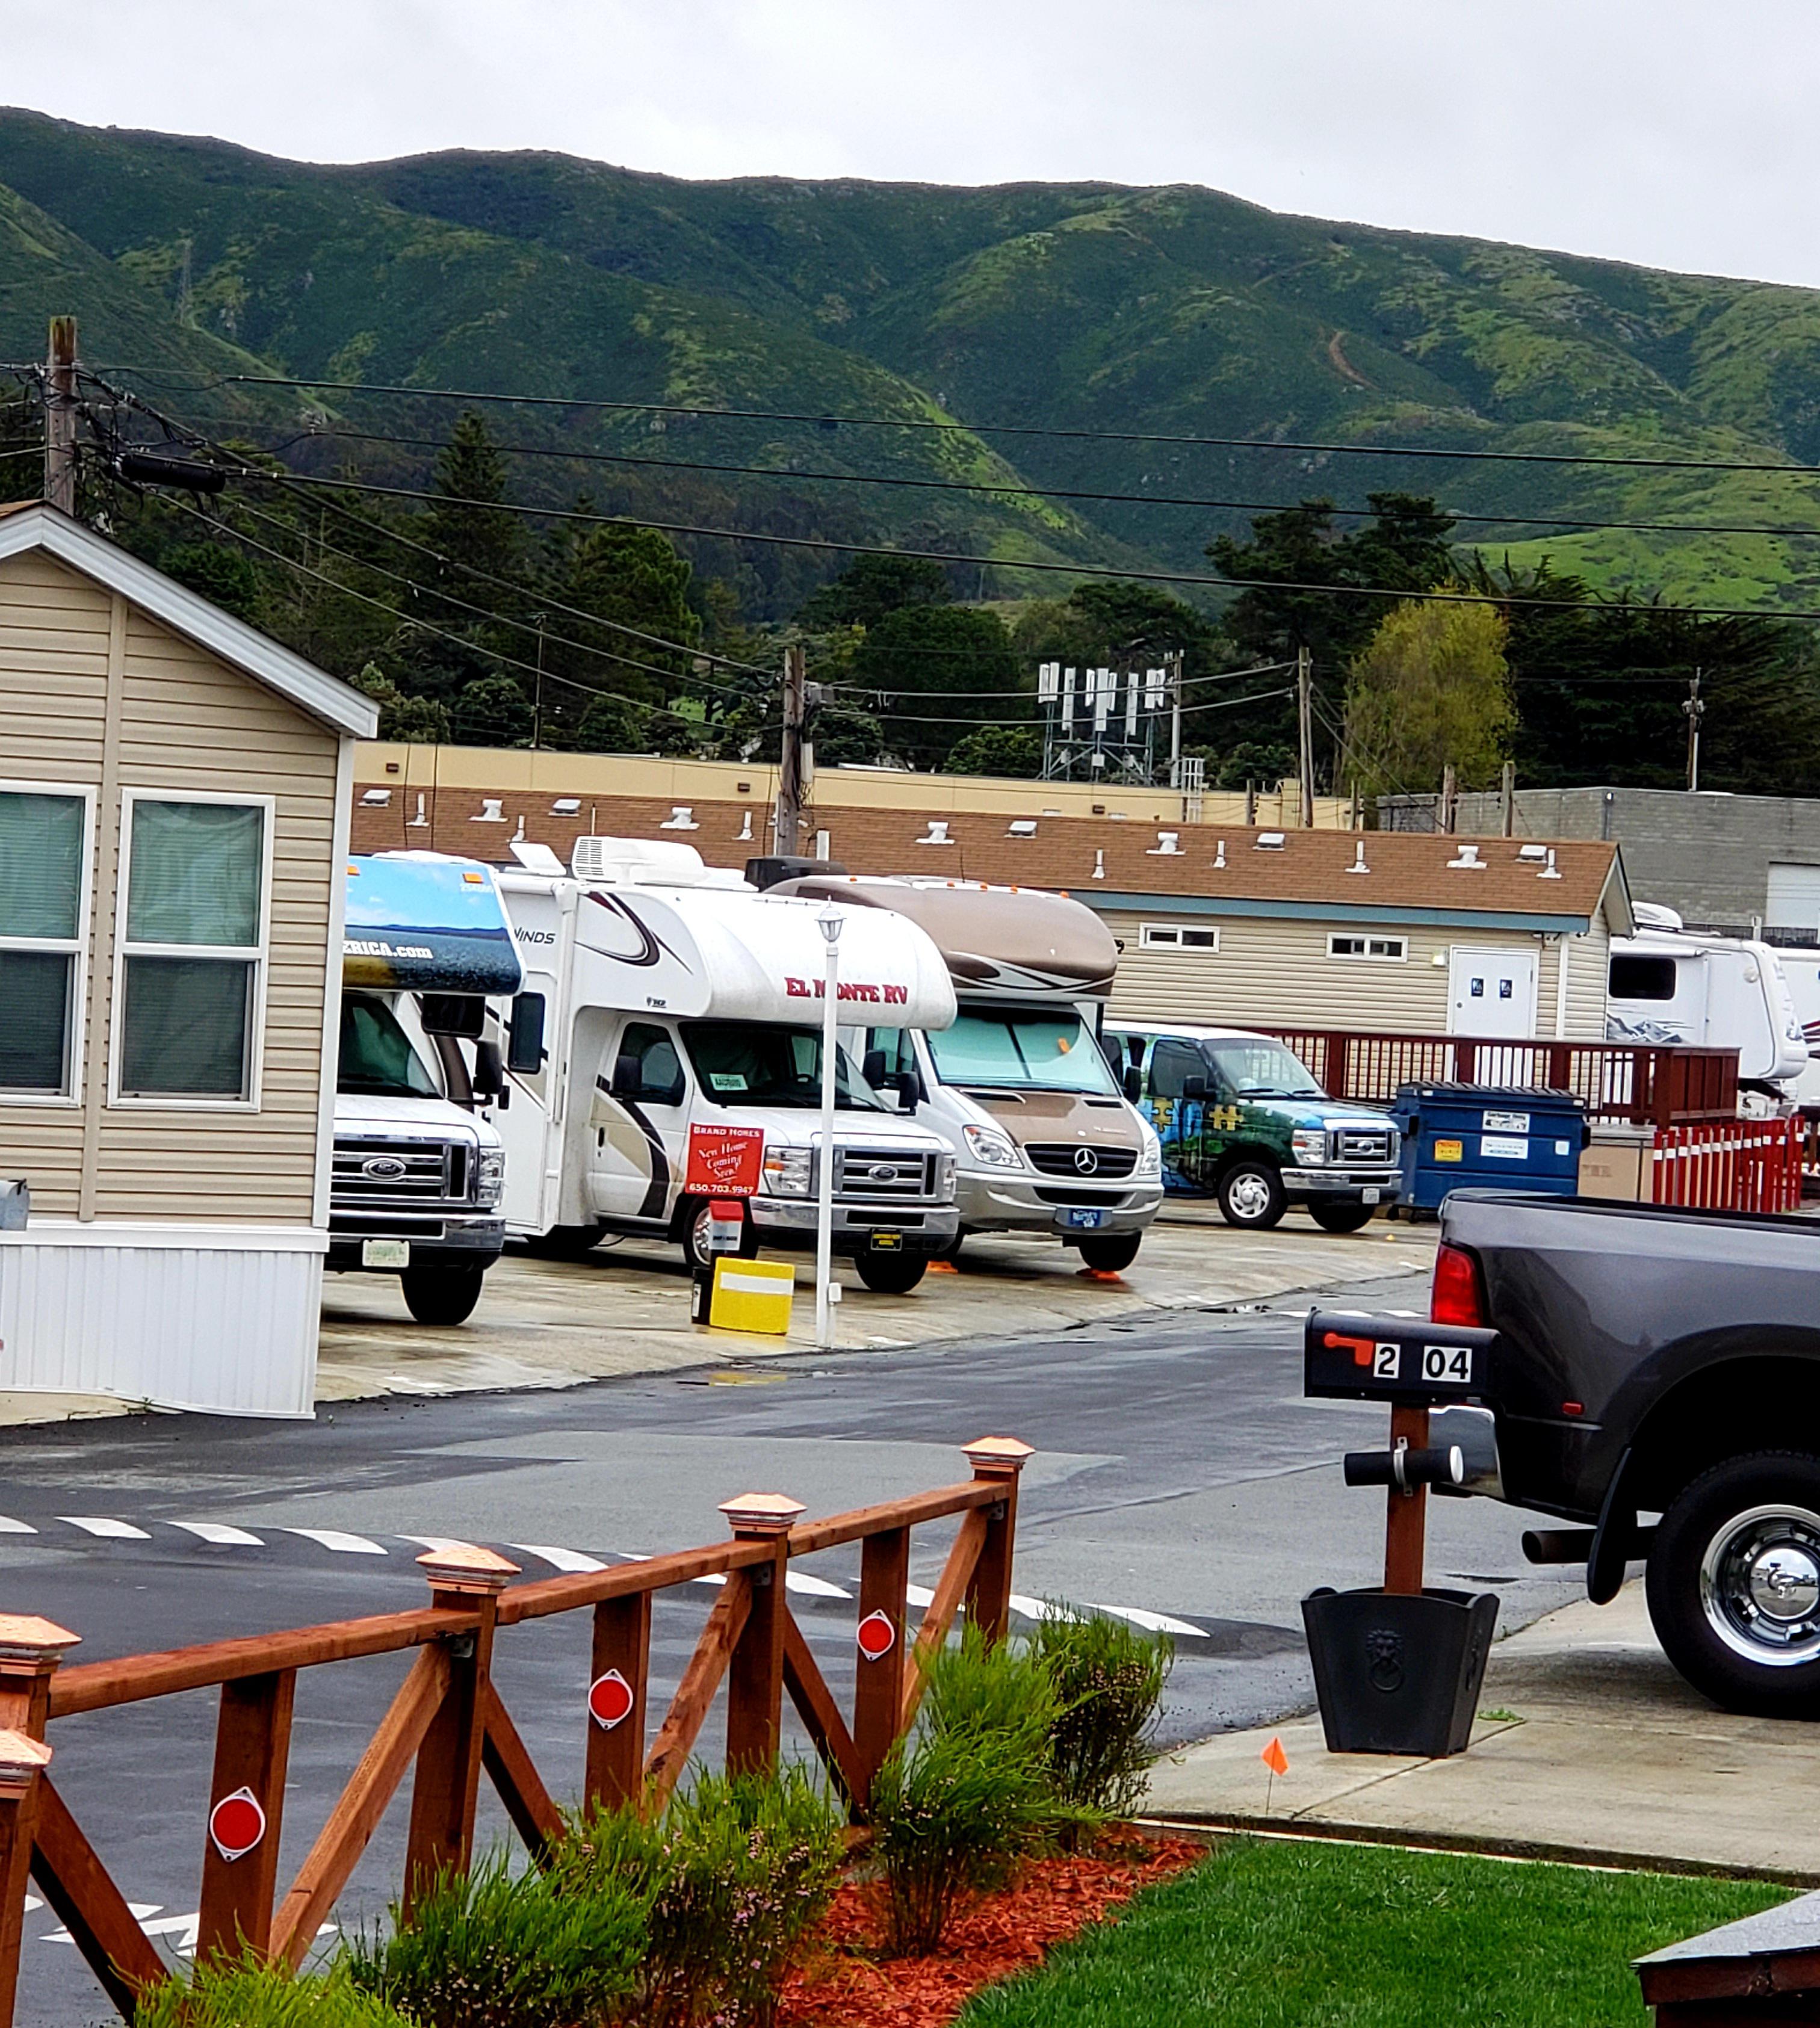 Are you looking for a long term RV Park near you? You'll find everything you need at Treasure Island Mobile Home & RV Park, the only park in the San Francisco area offering long term RV parking with full hookups. We proudly host many long-term residents, and we offer a month-to-month residency package to RV owners looking to stay with us a little longer. Contact us for more information on long term RV parking.